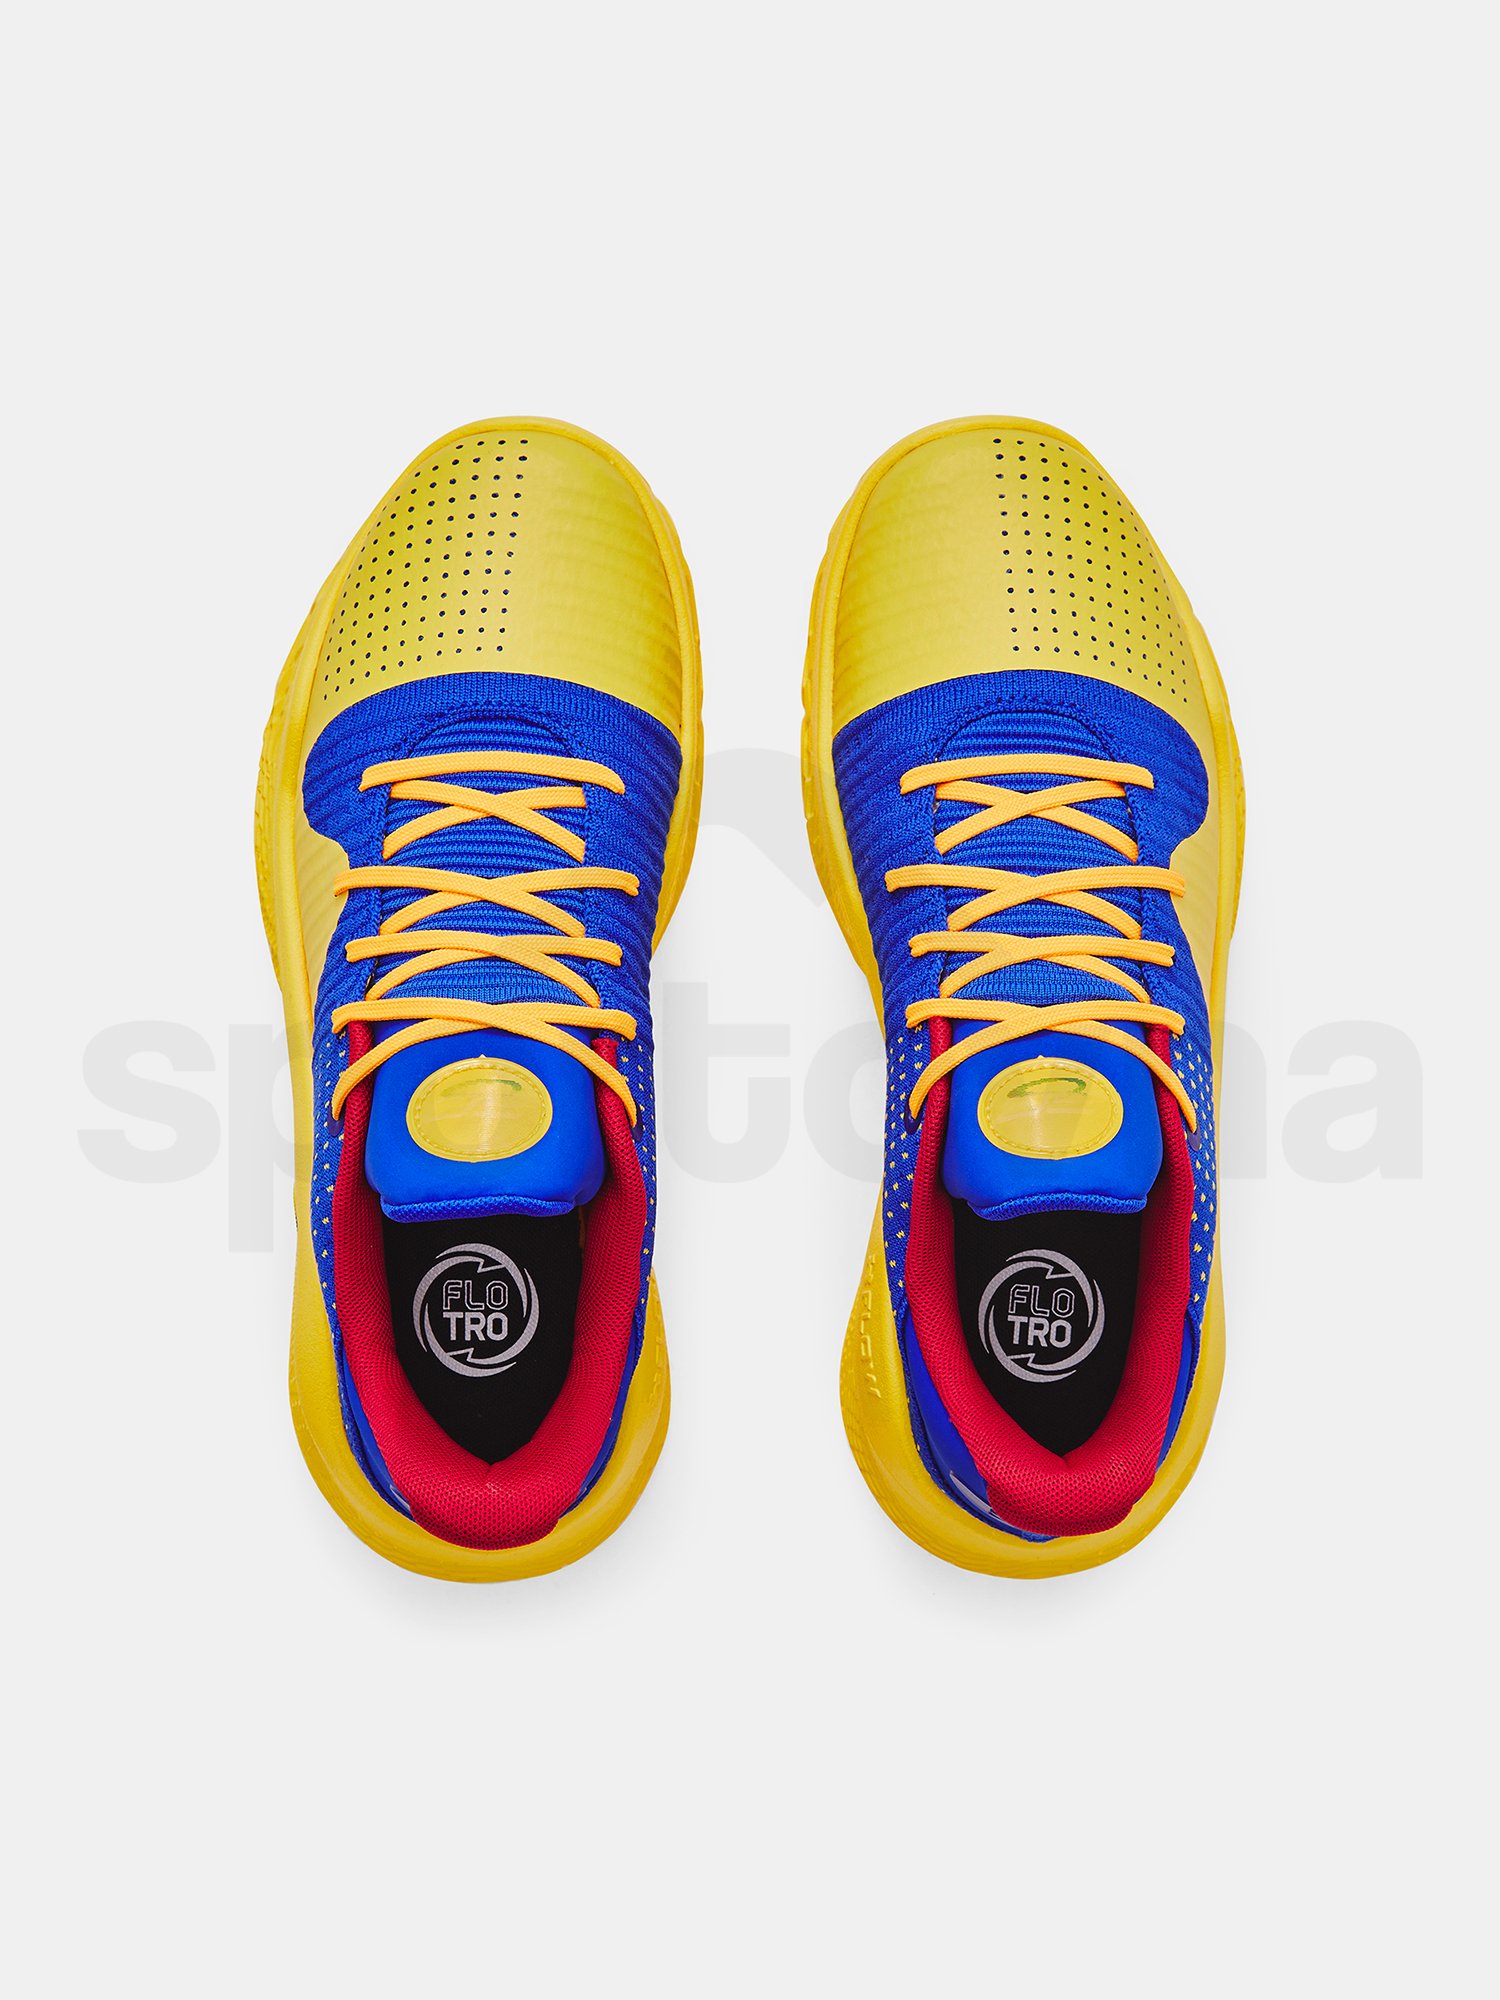 Boty Under Armour CURRY 4 LOW FLOTRO-BLU